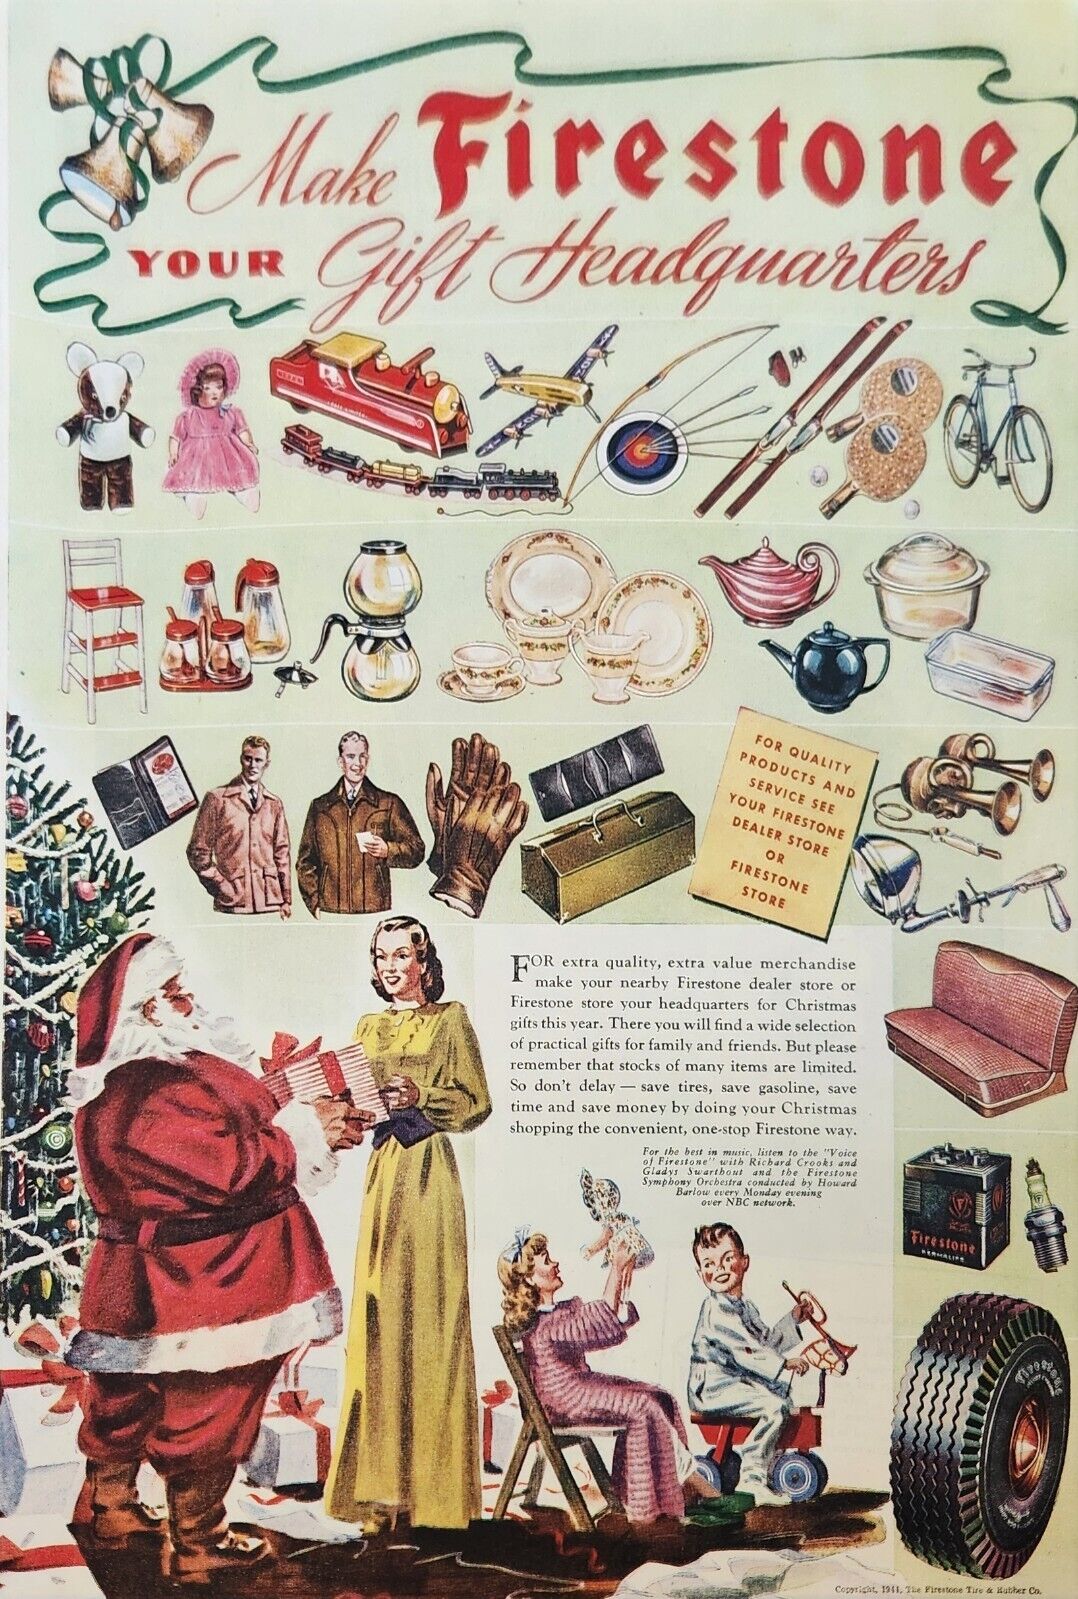 1944 Firestone tires your gift headquarters vintage ad